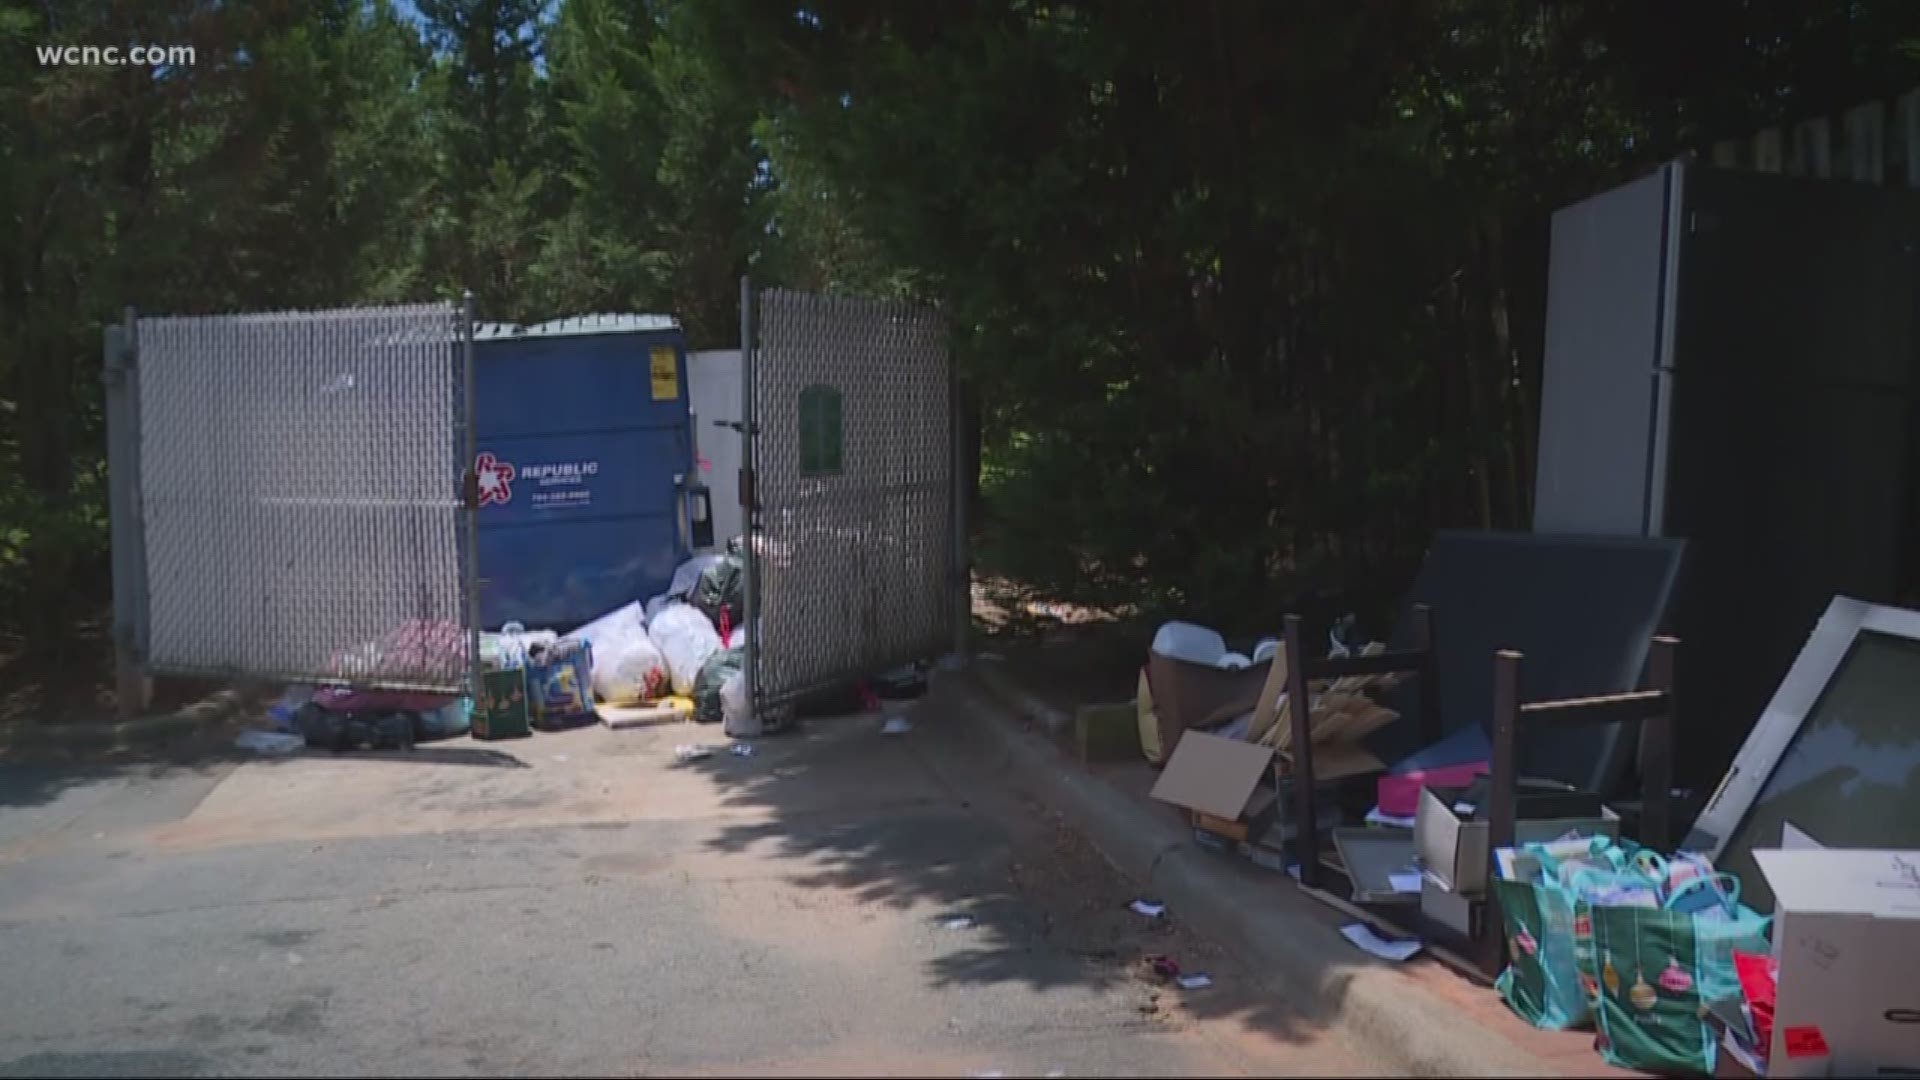 Neighbors fight with HOA over trash problem